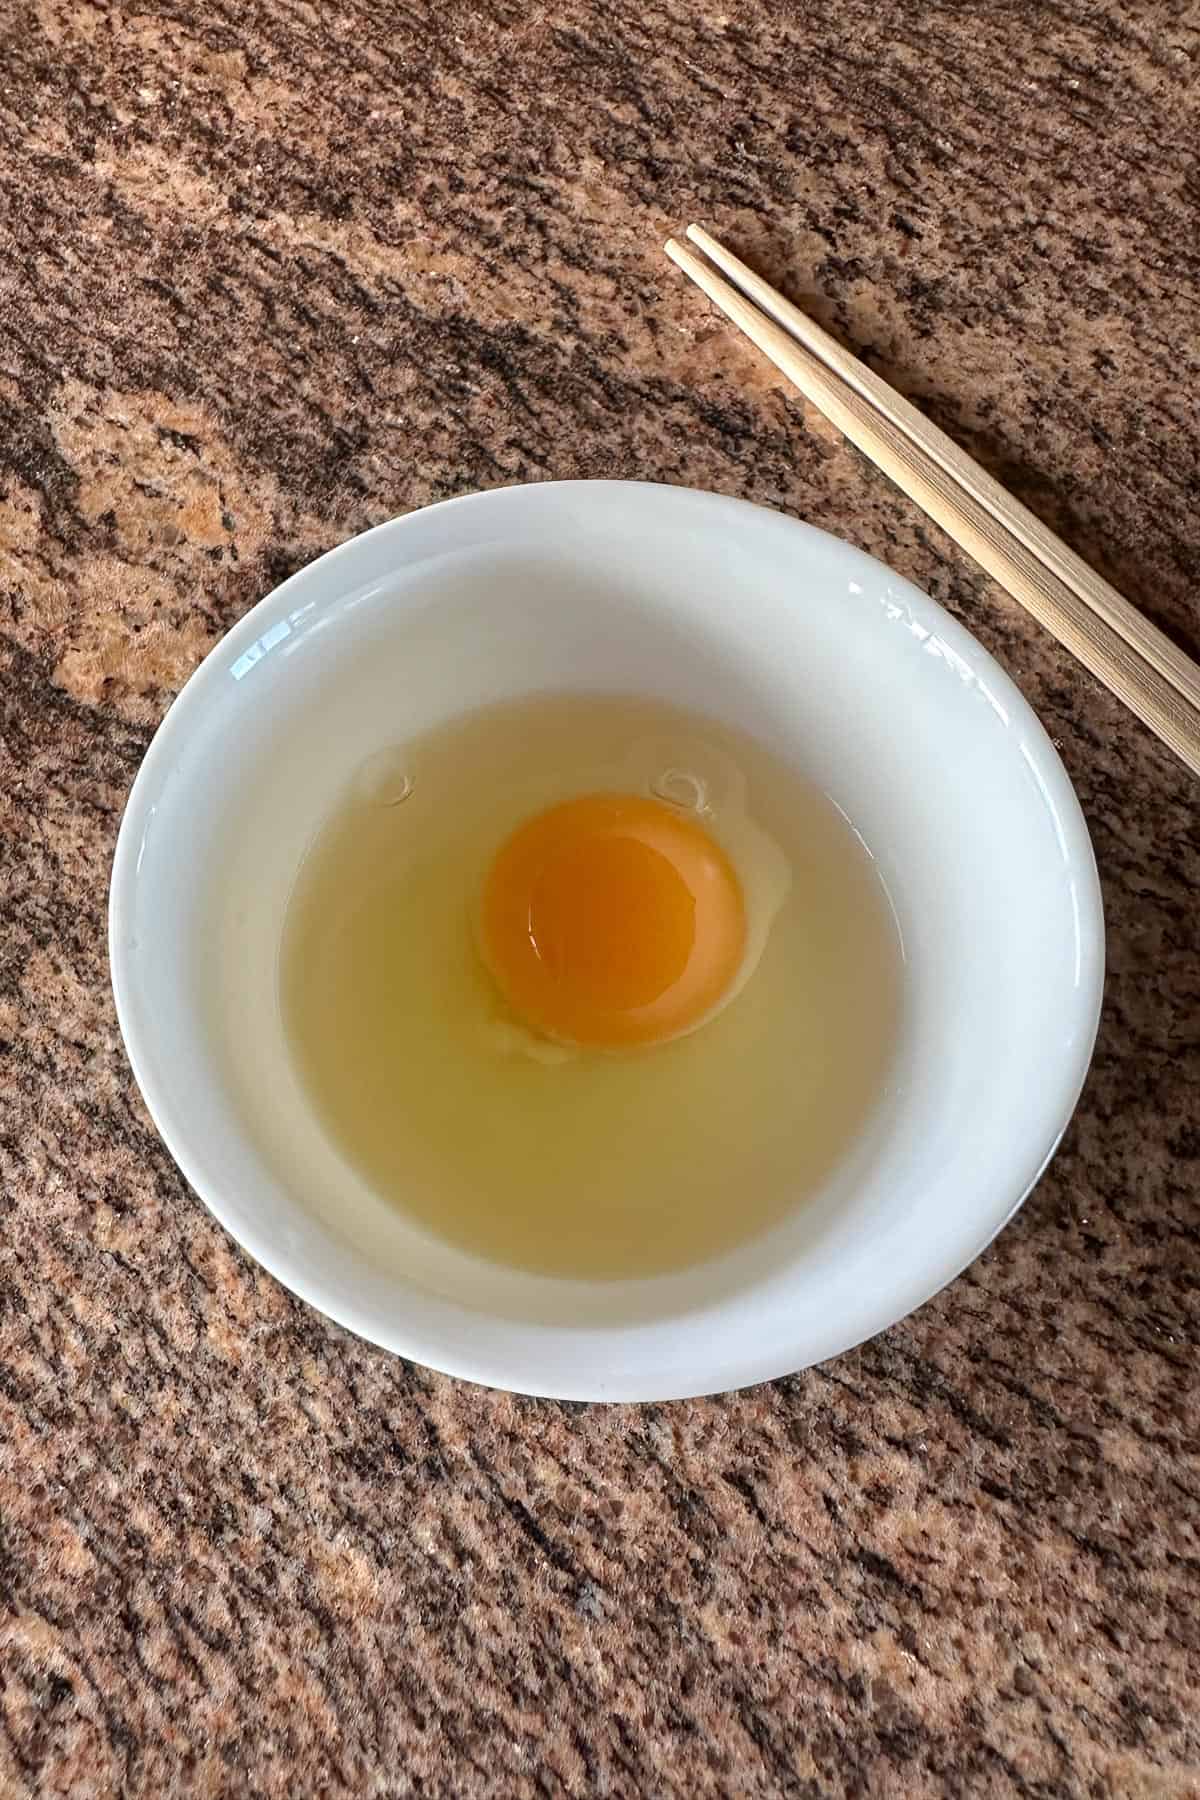 A fresh egg from OK Poultry in Hawaii, just cracked.